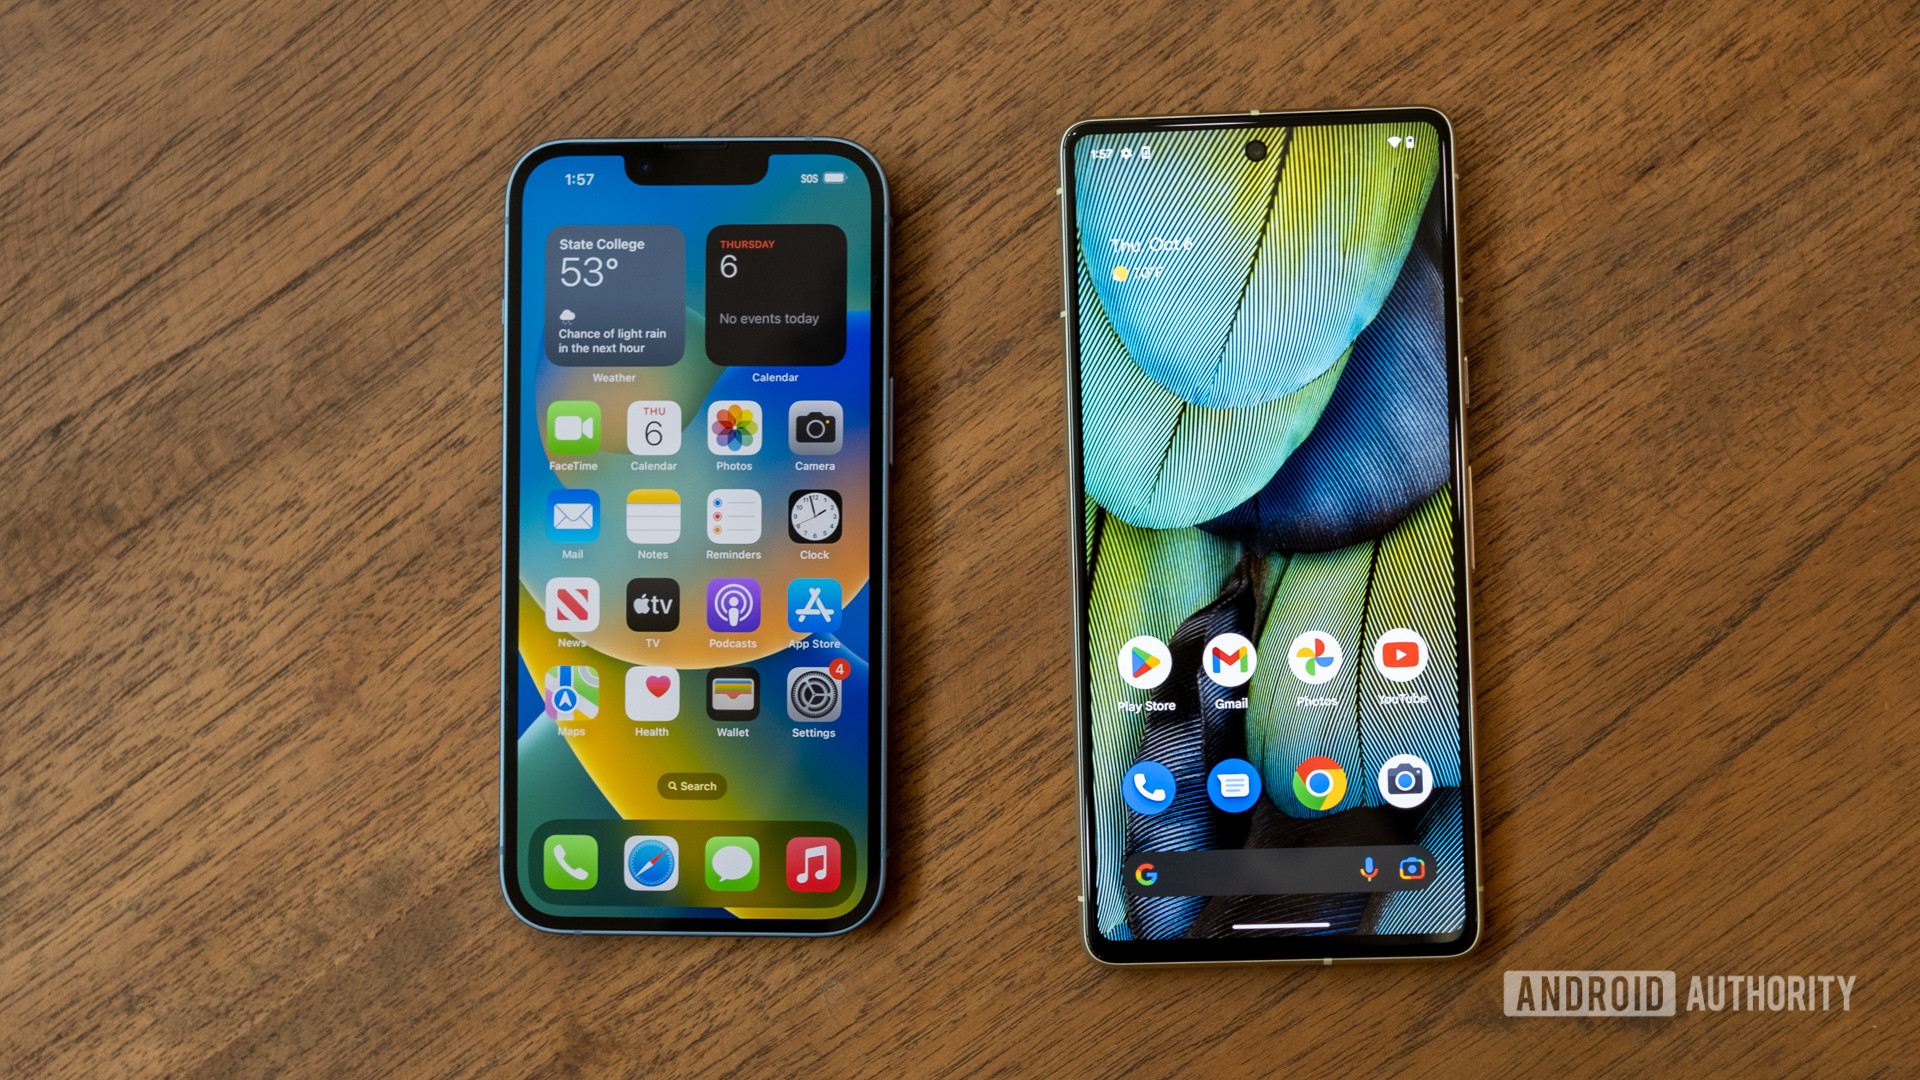 Google Pixel 7 next to Apple iPhone 14 in a wooden table showing the lock screens of the two phones.